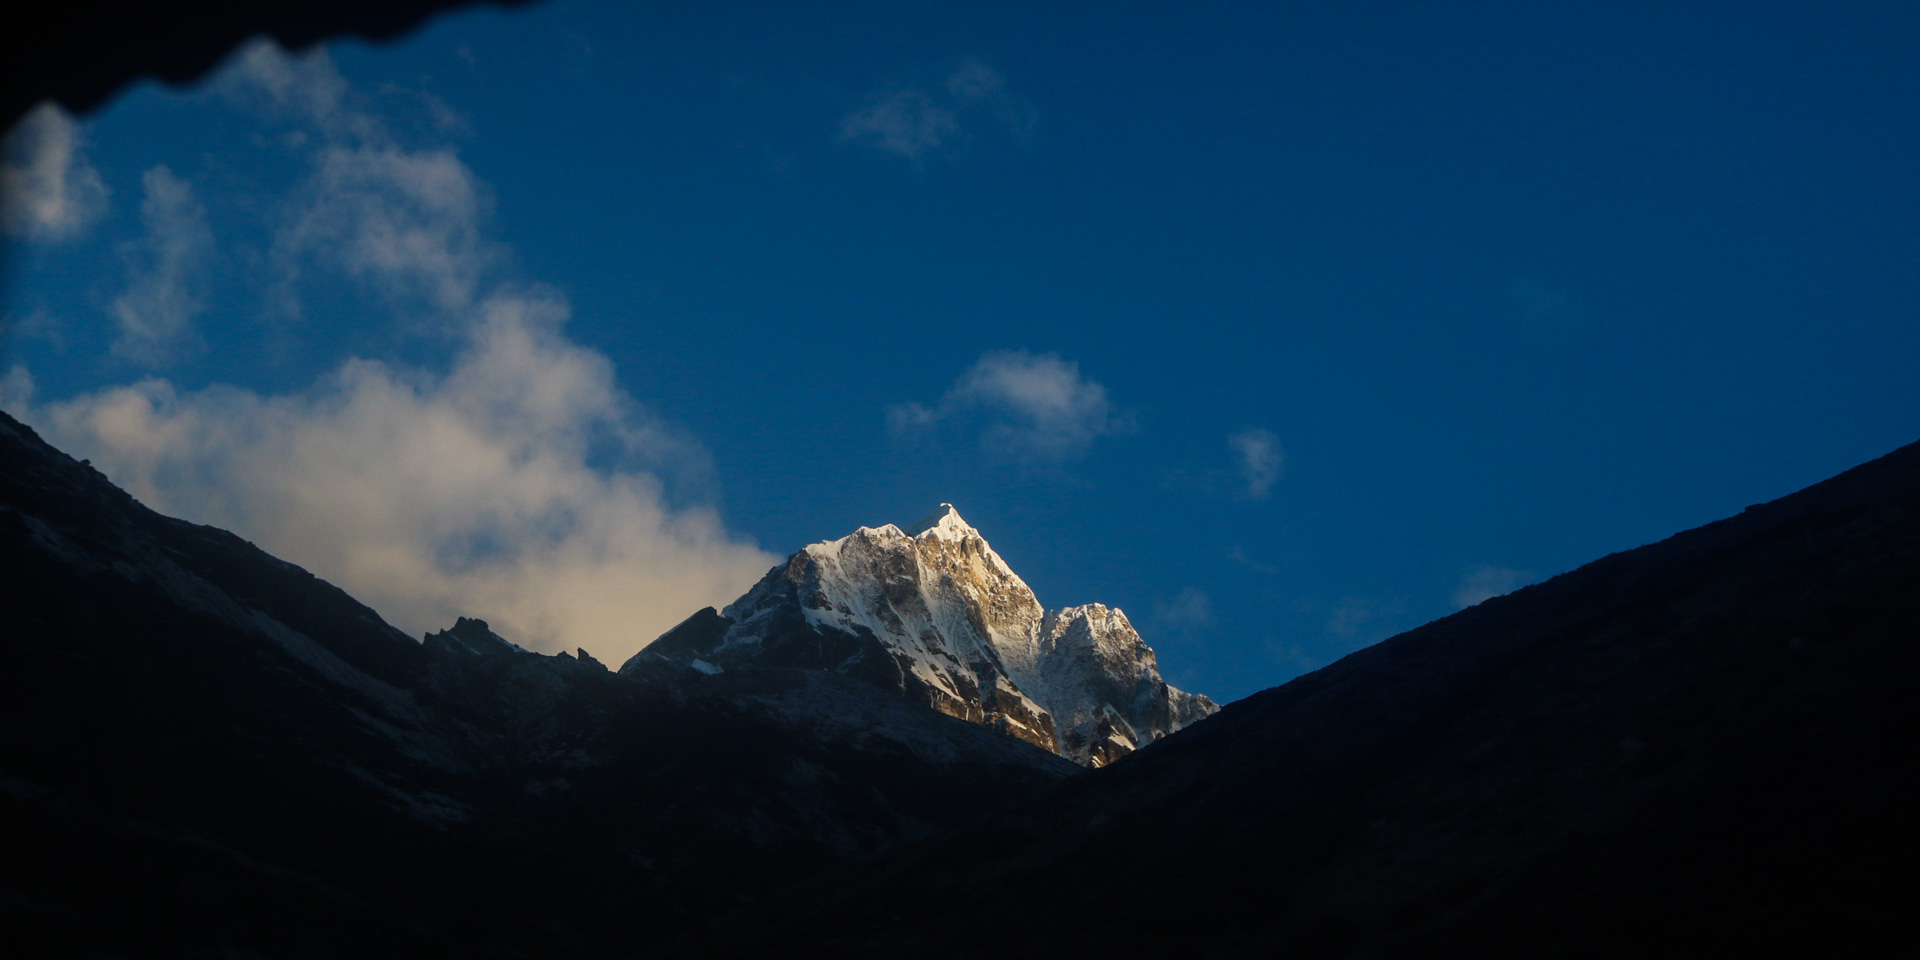 View from Tea house in Khare the base camp for Mera Peak climbing in Nepal